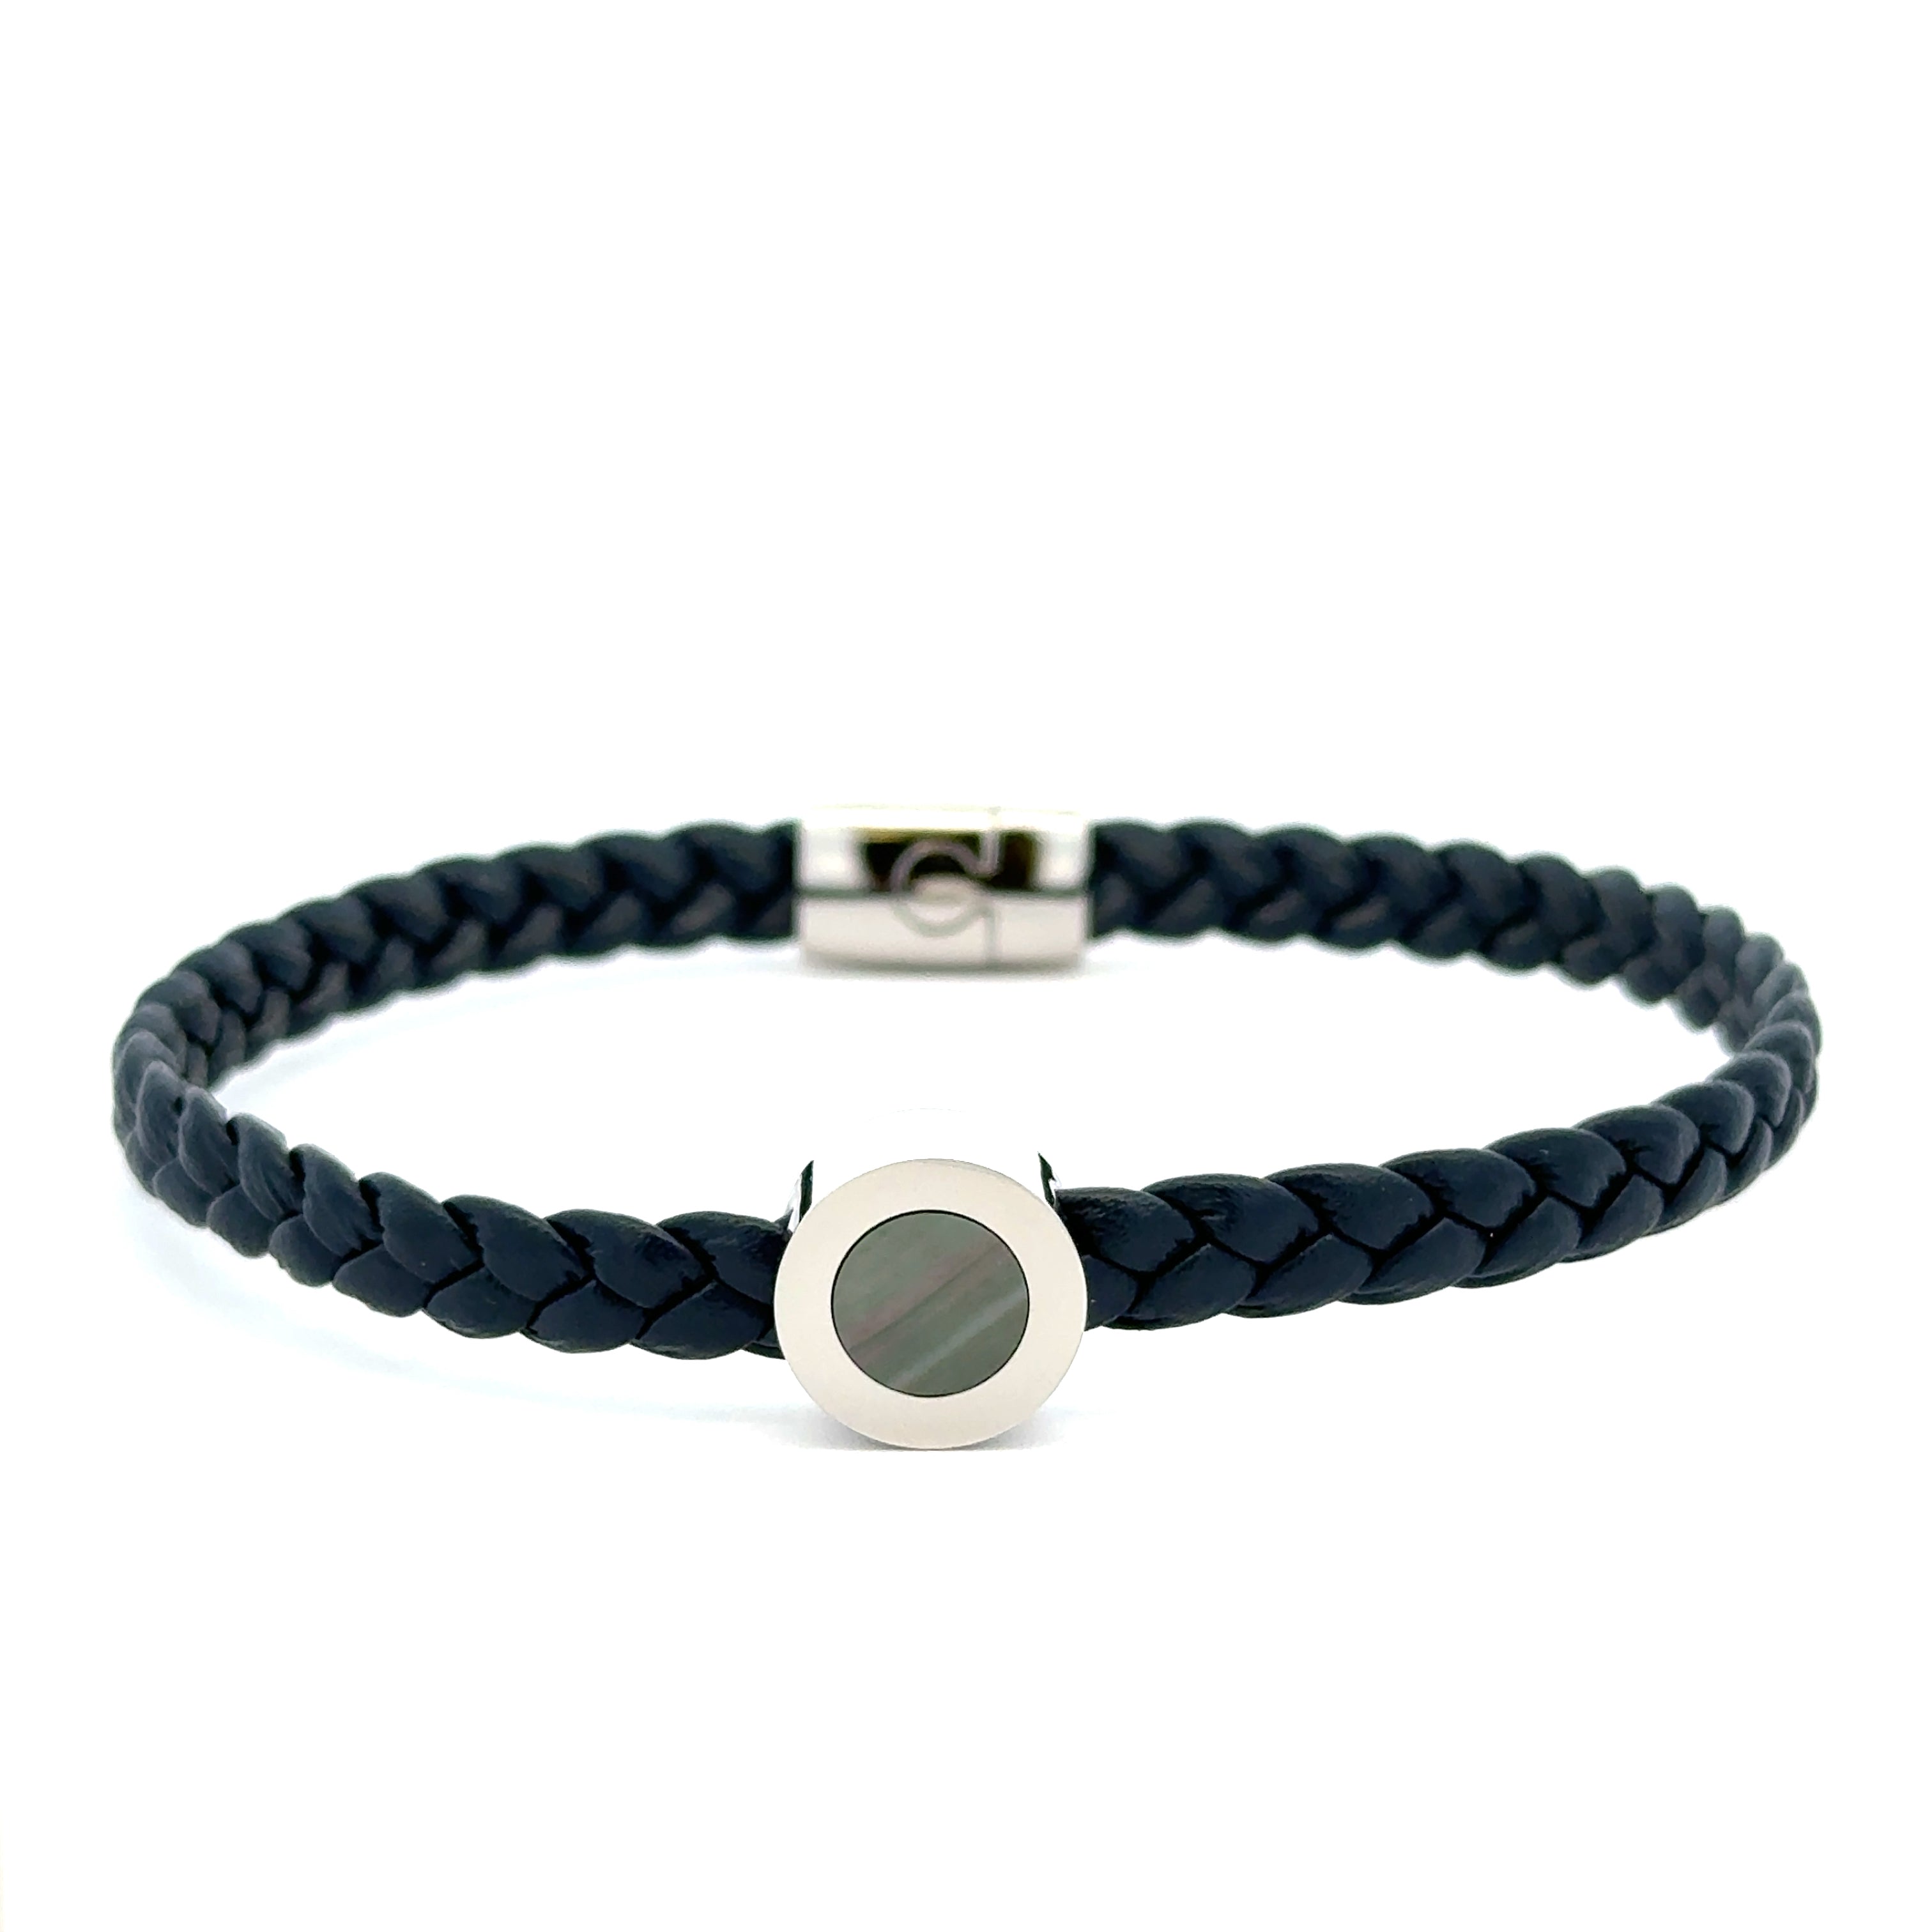 Stainless Steel Braided Blue Leather Bracelet With Black Mother of Pearl